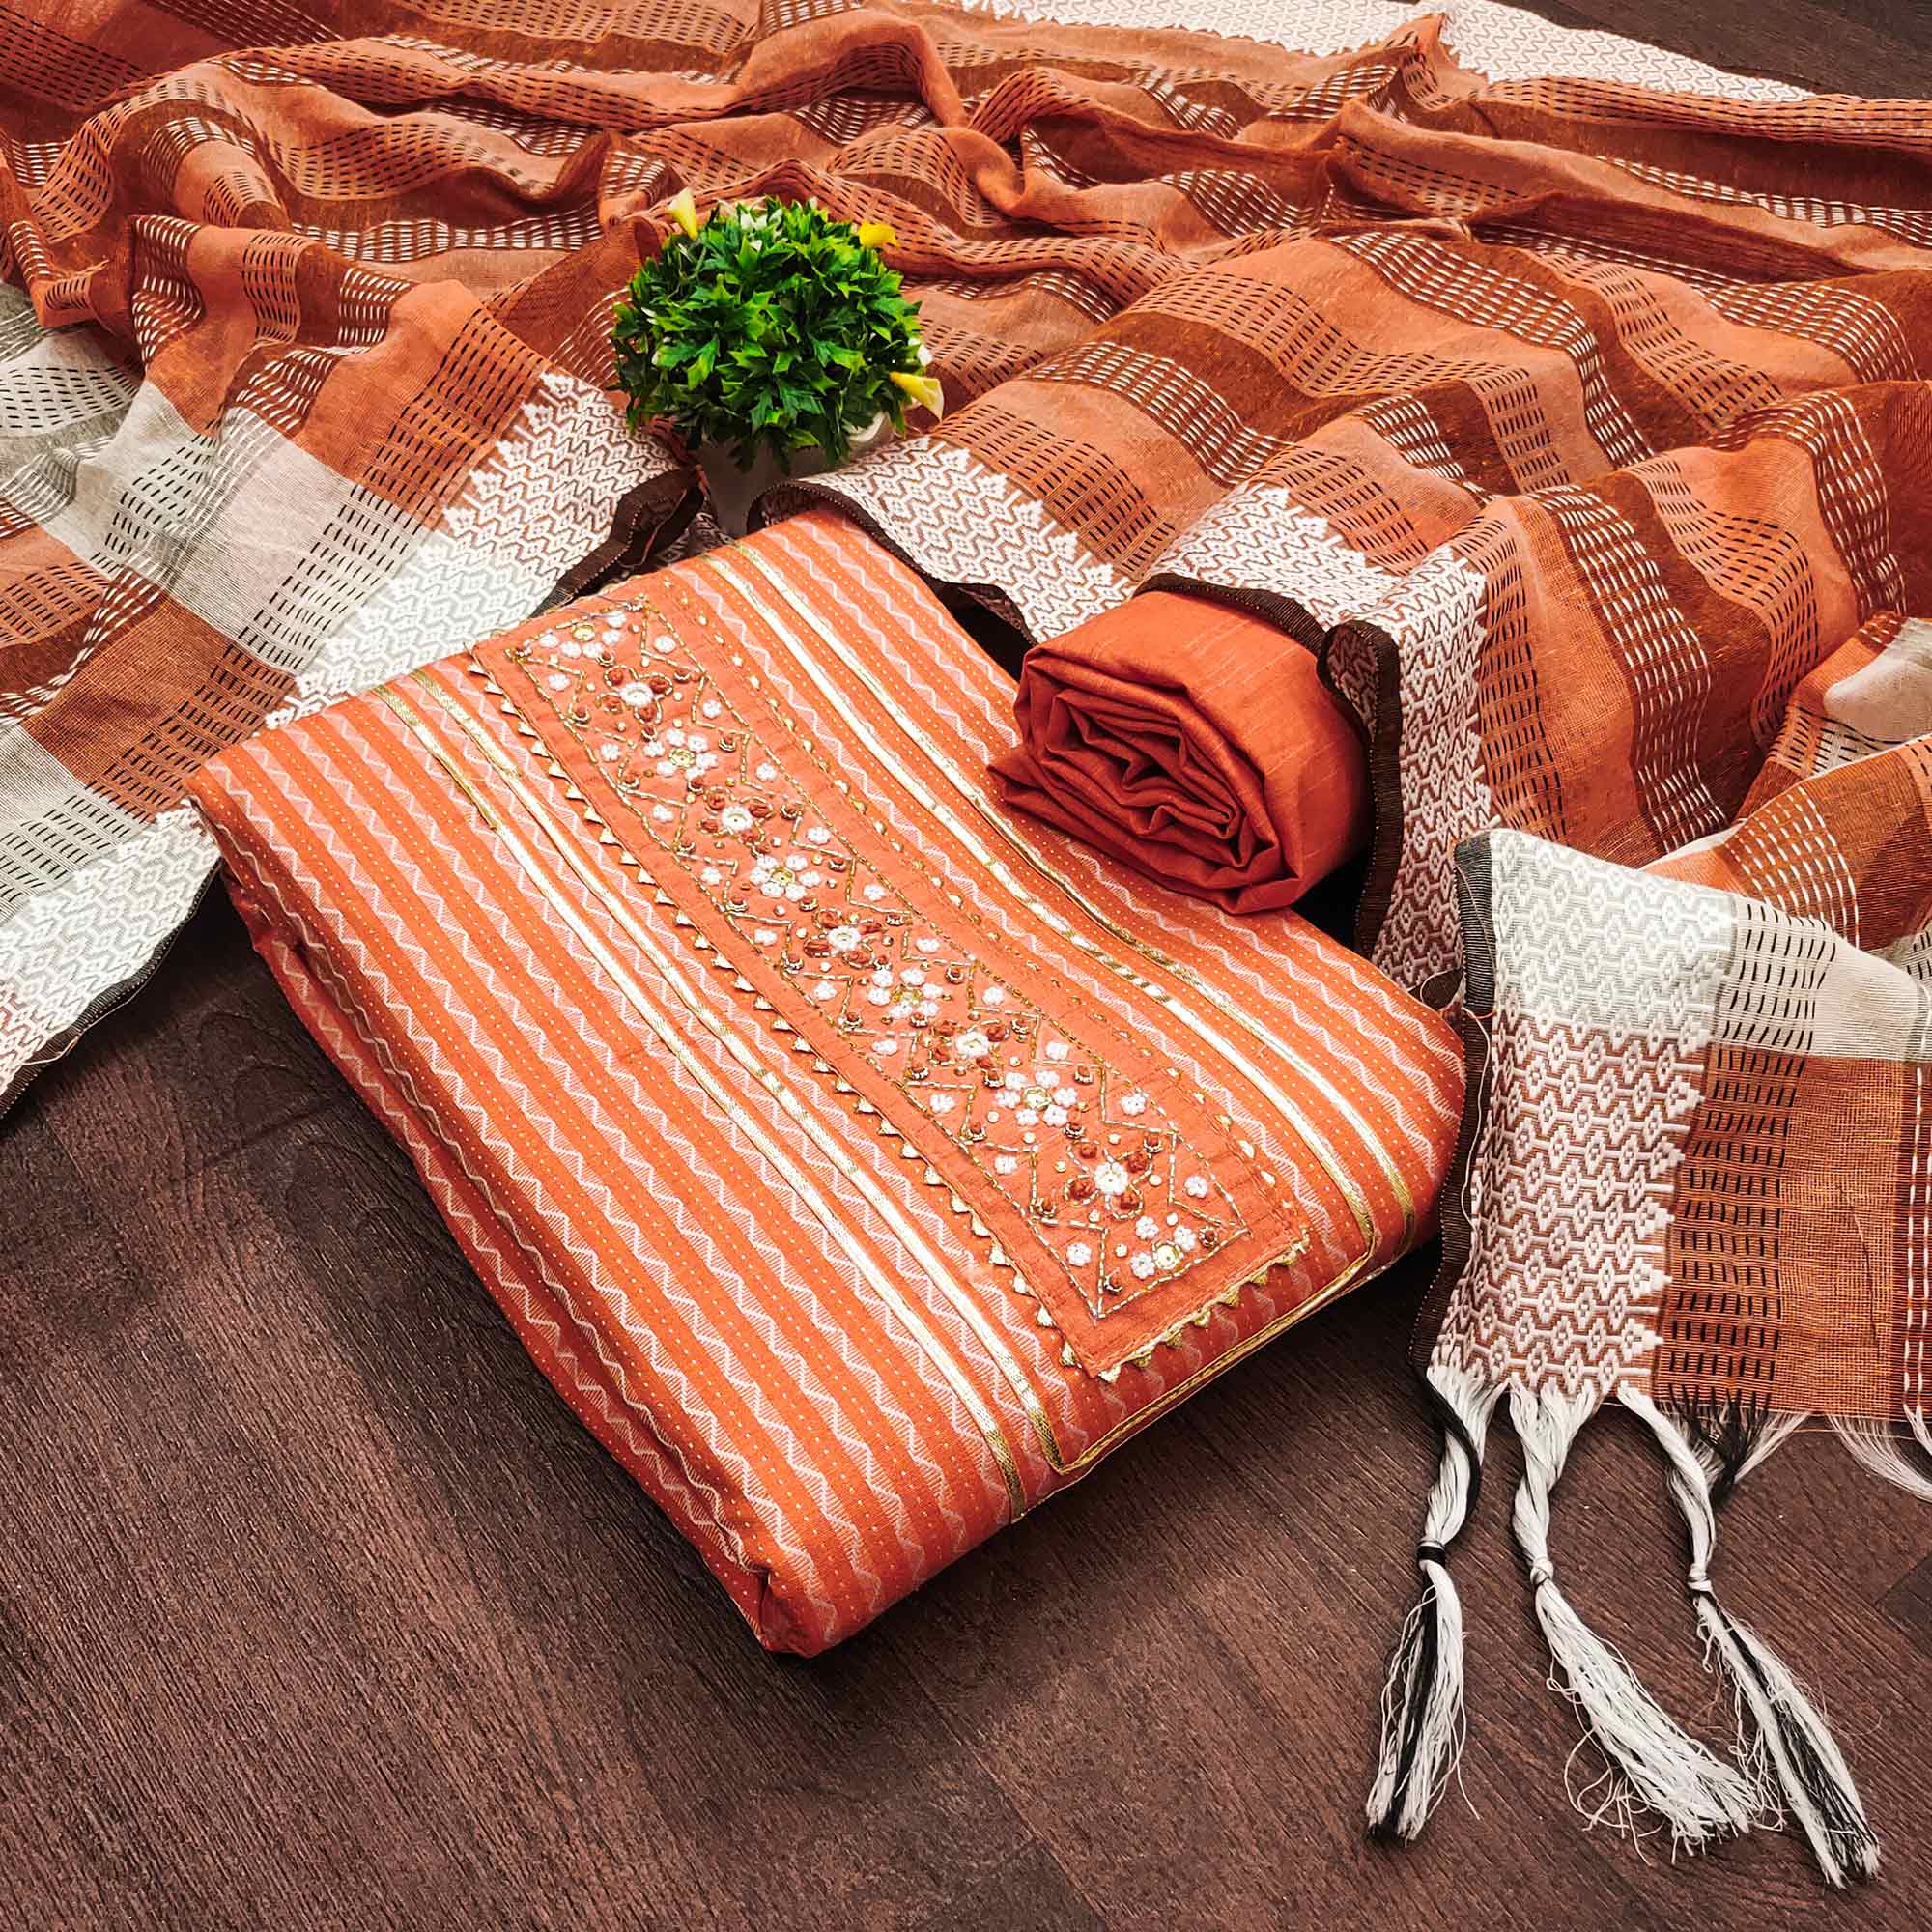 Orange Woven With Handwork Cotton Blend Dress Material